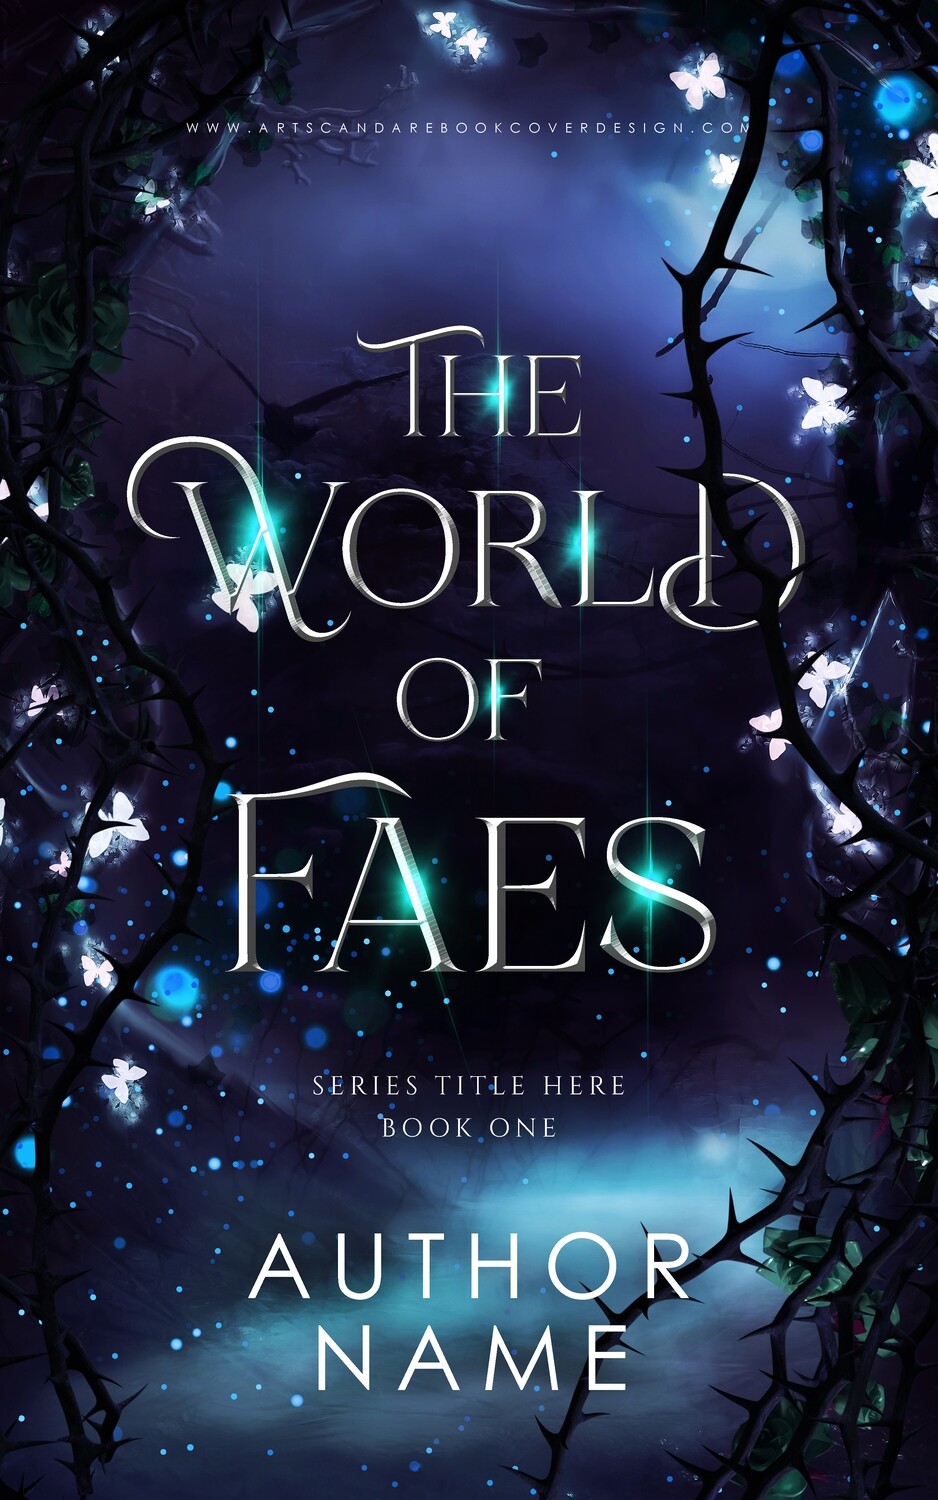 Ebook: The World of Faes